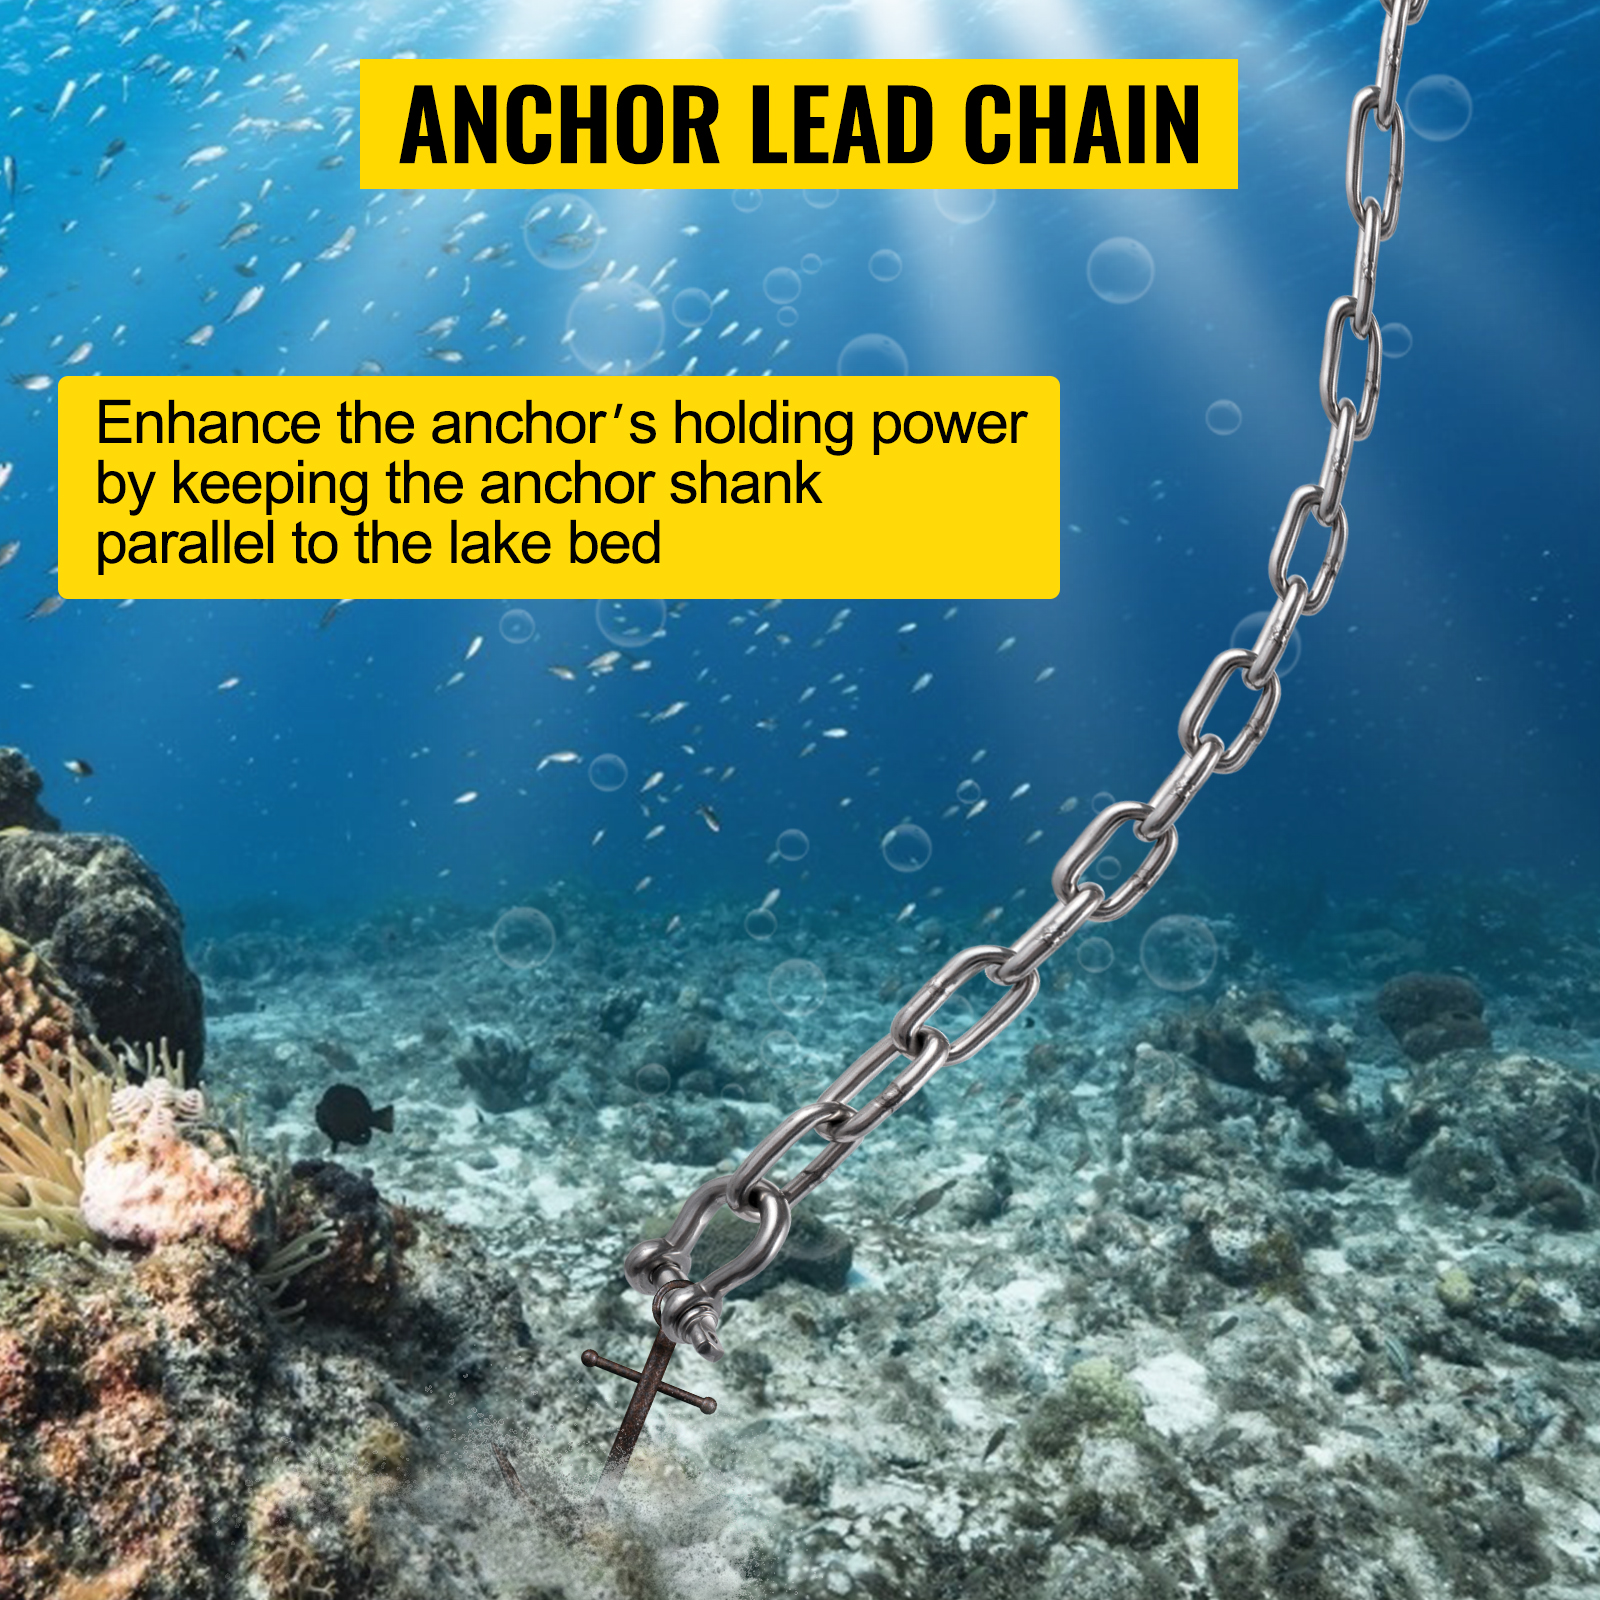 Anchor Lead Chain 1/4" x 2' Calibrated Galvanized with 2 SS 1/4" Bow Shackles